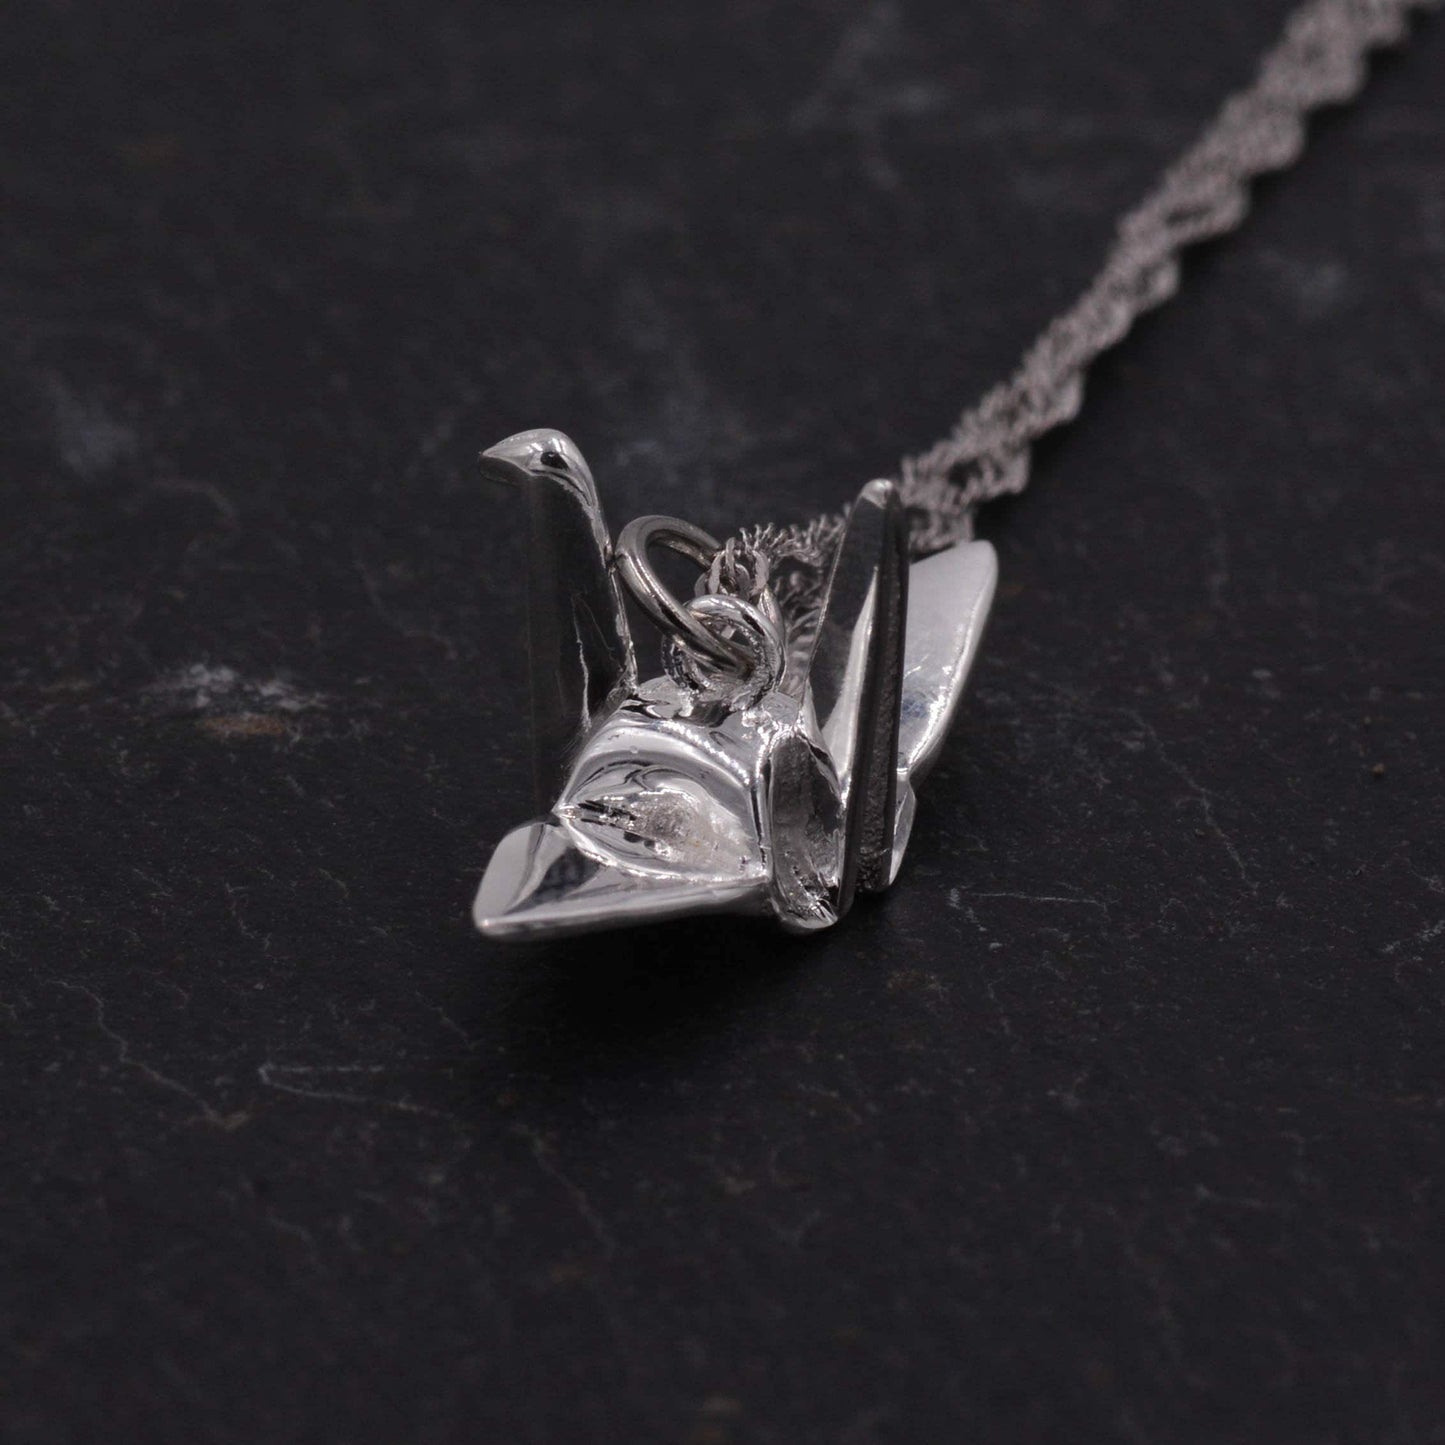 Sterling Silver Beautiful 3D Japanese Origami Crane Bird Pendant Necklace - Cute Fun and Quirky